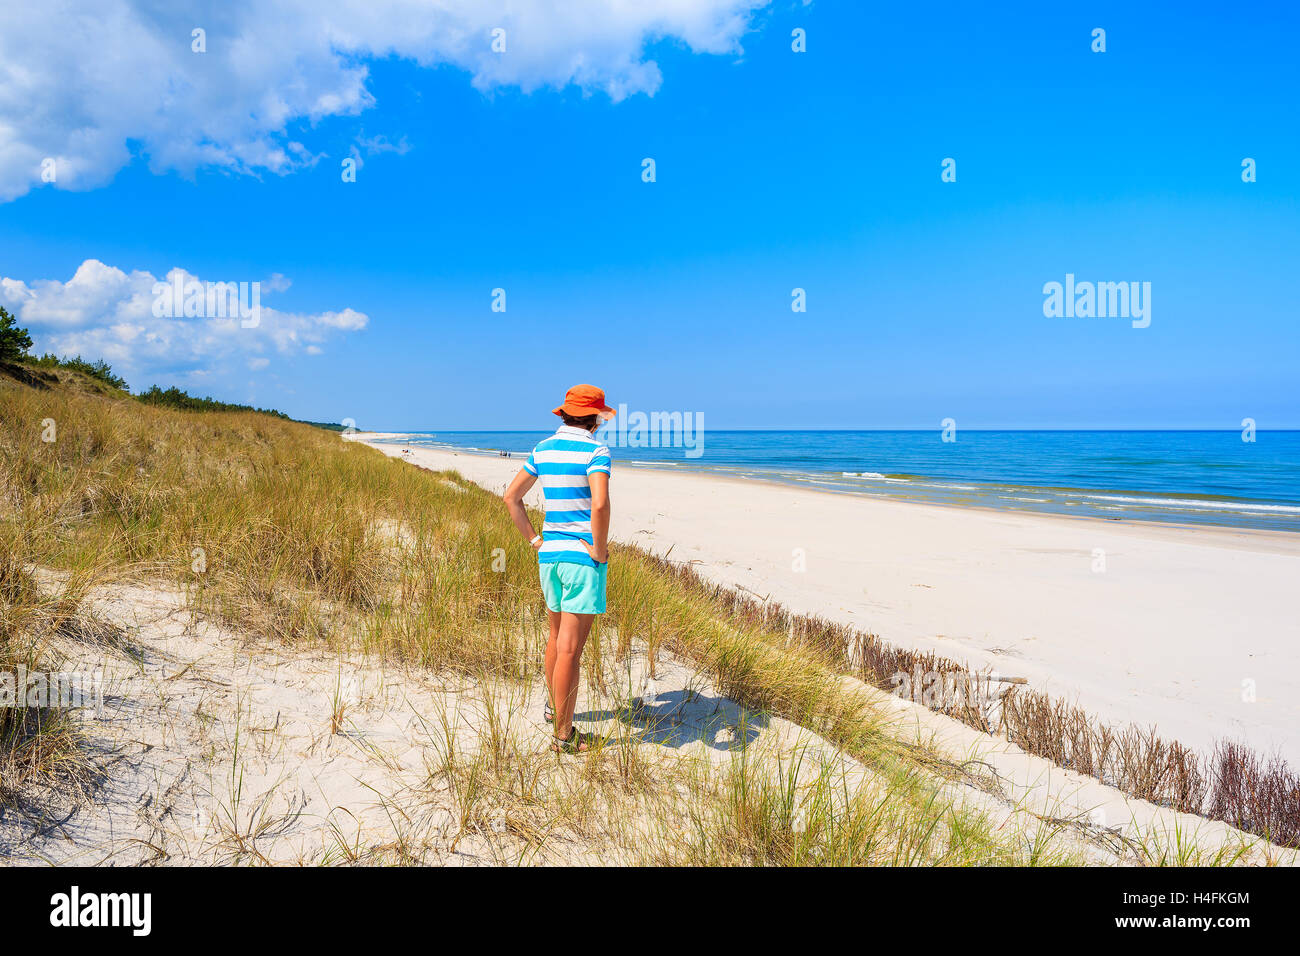 Young woman tourist standing on sand dune and looking at white sand beach in Bialogora, Baltic Sea, Poland Stock Photo